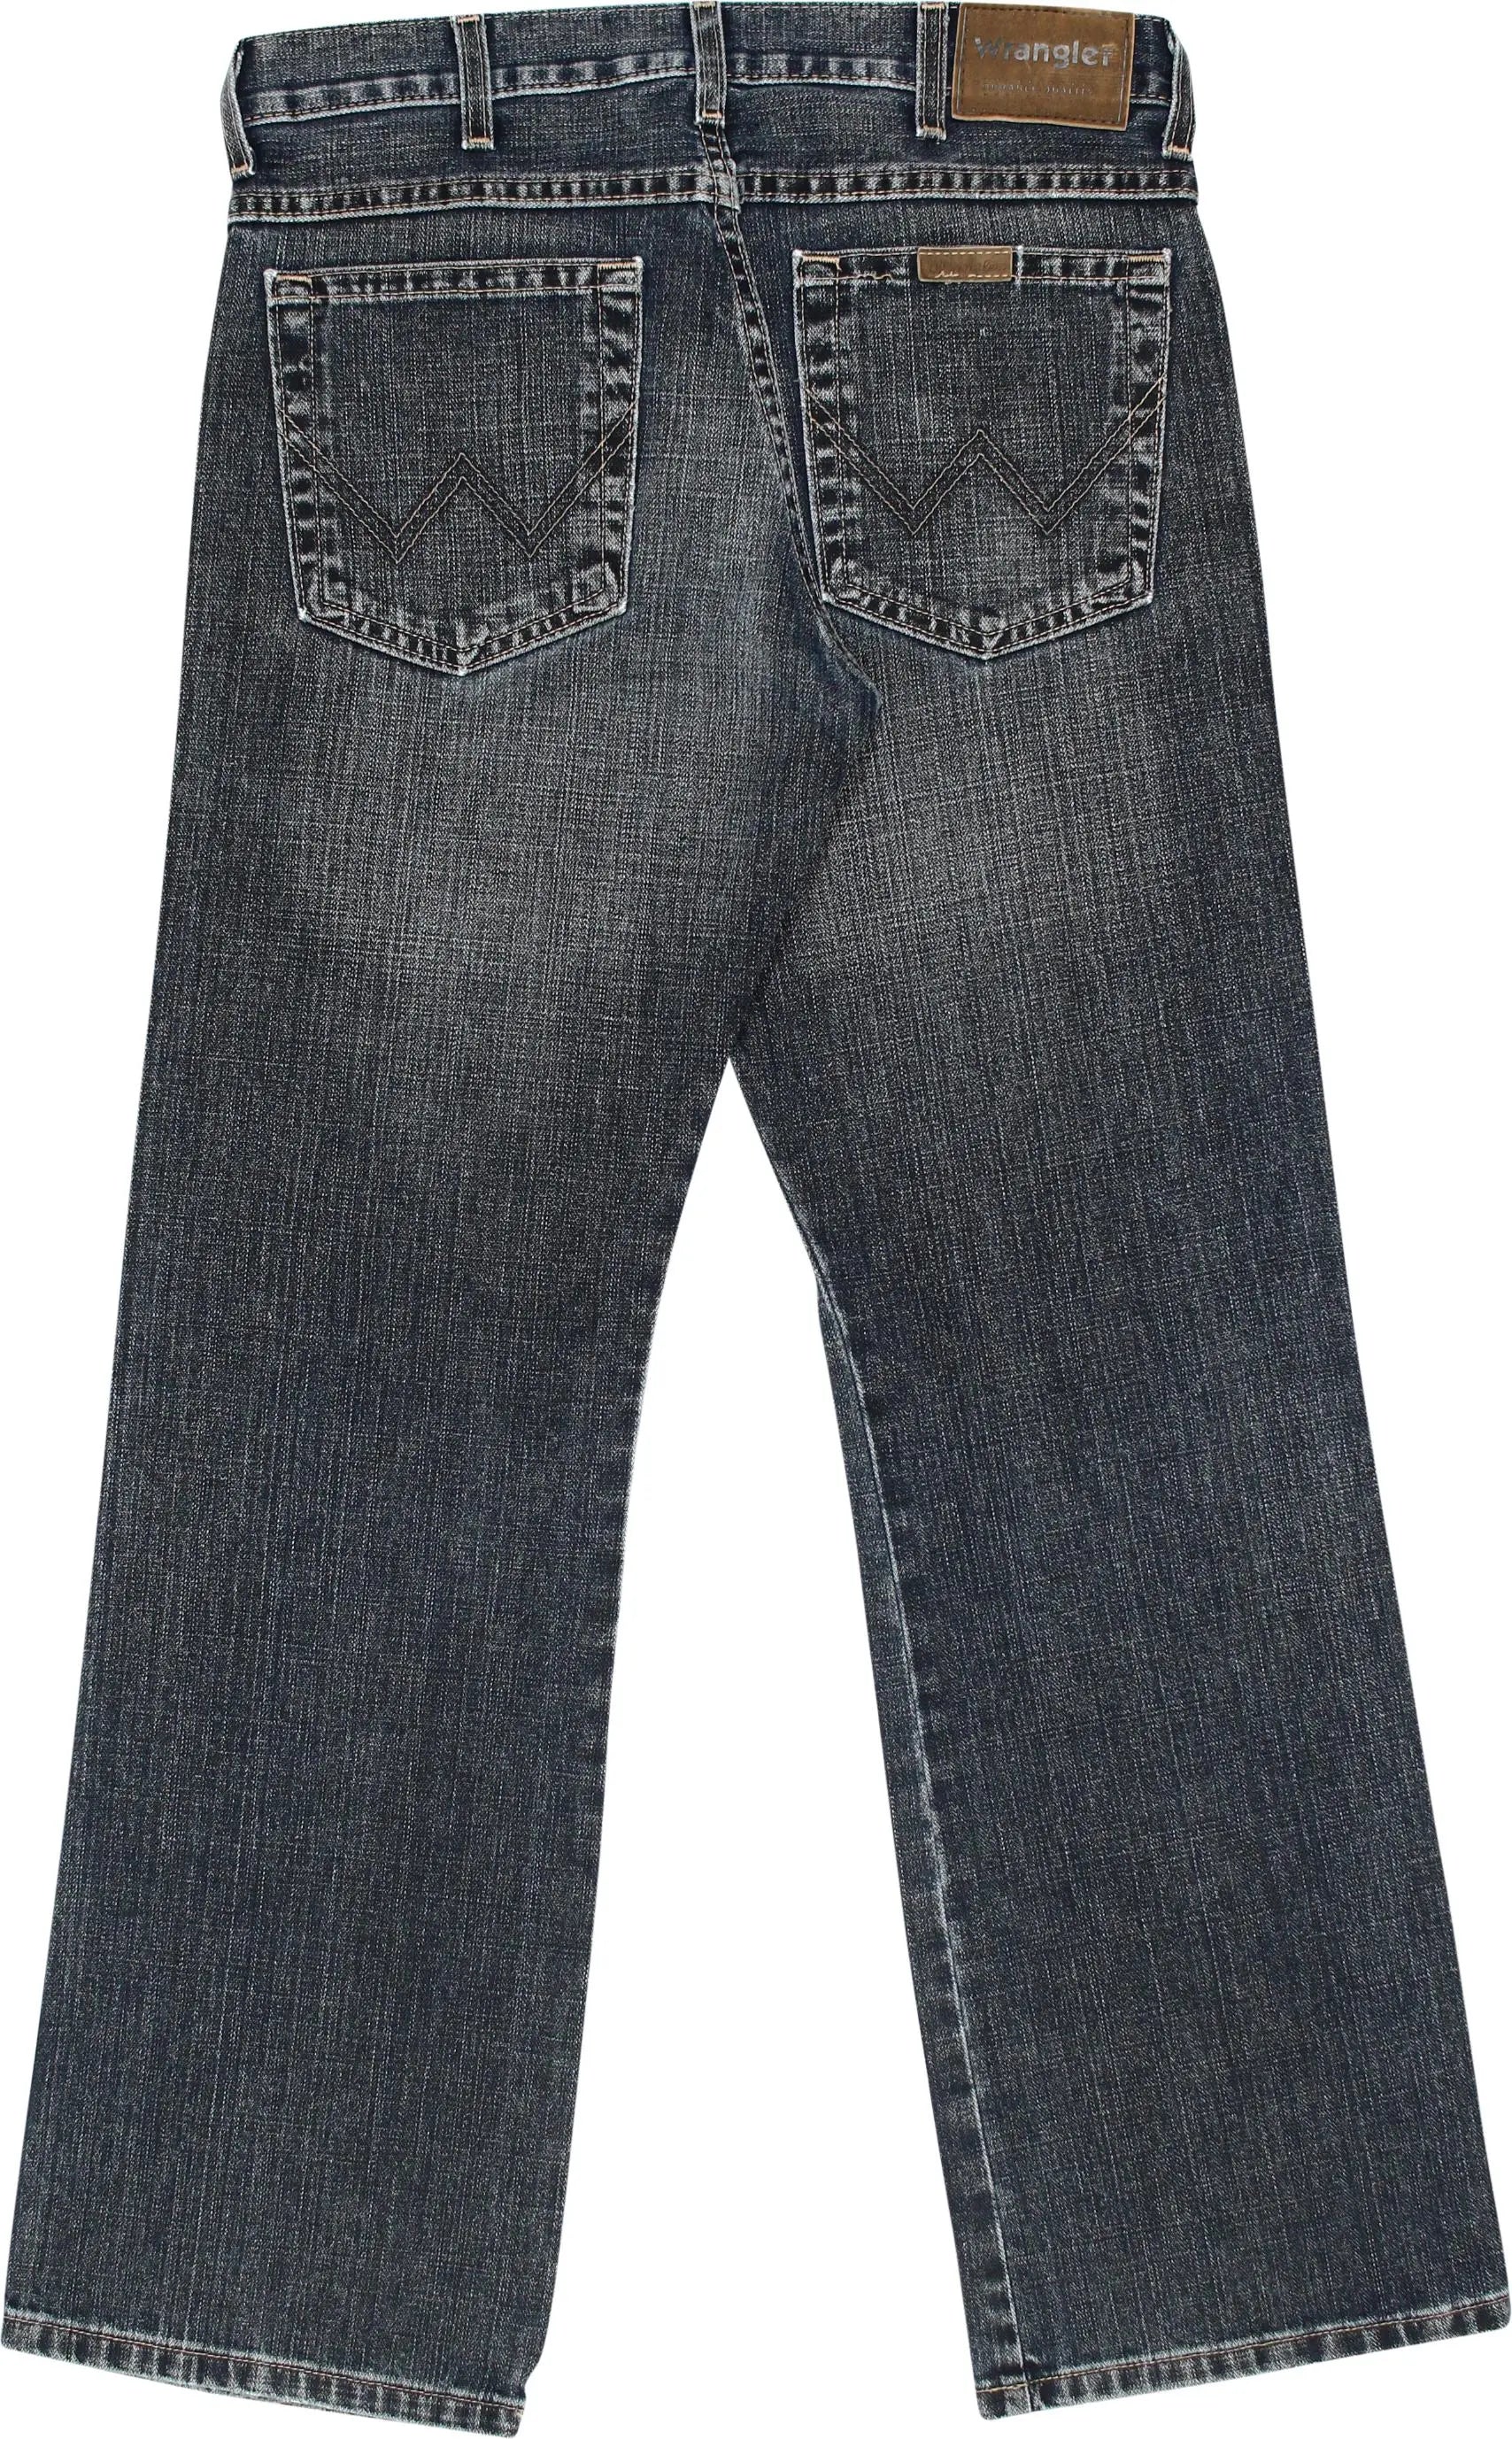 Wrangler - Dayton Jeans by Wrangler- ThriftTale.com - Vintage and second handclothing